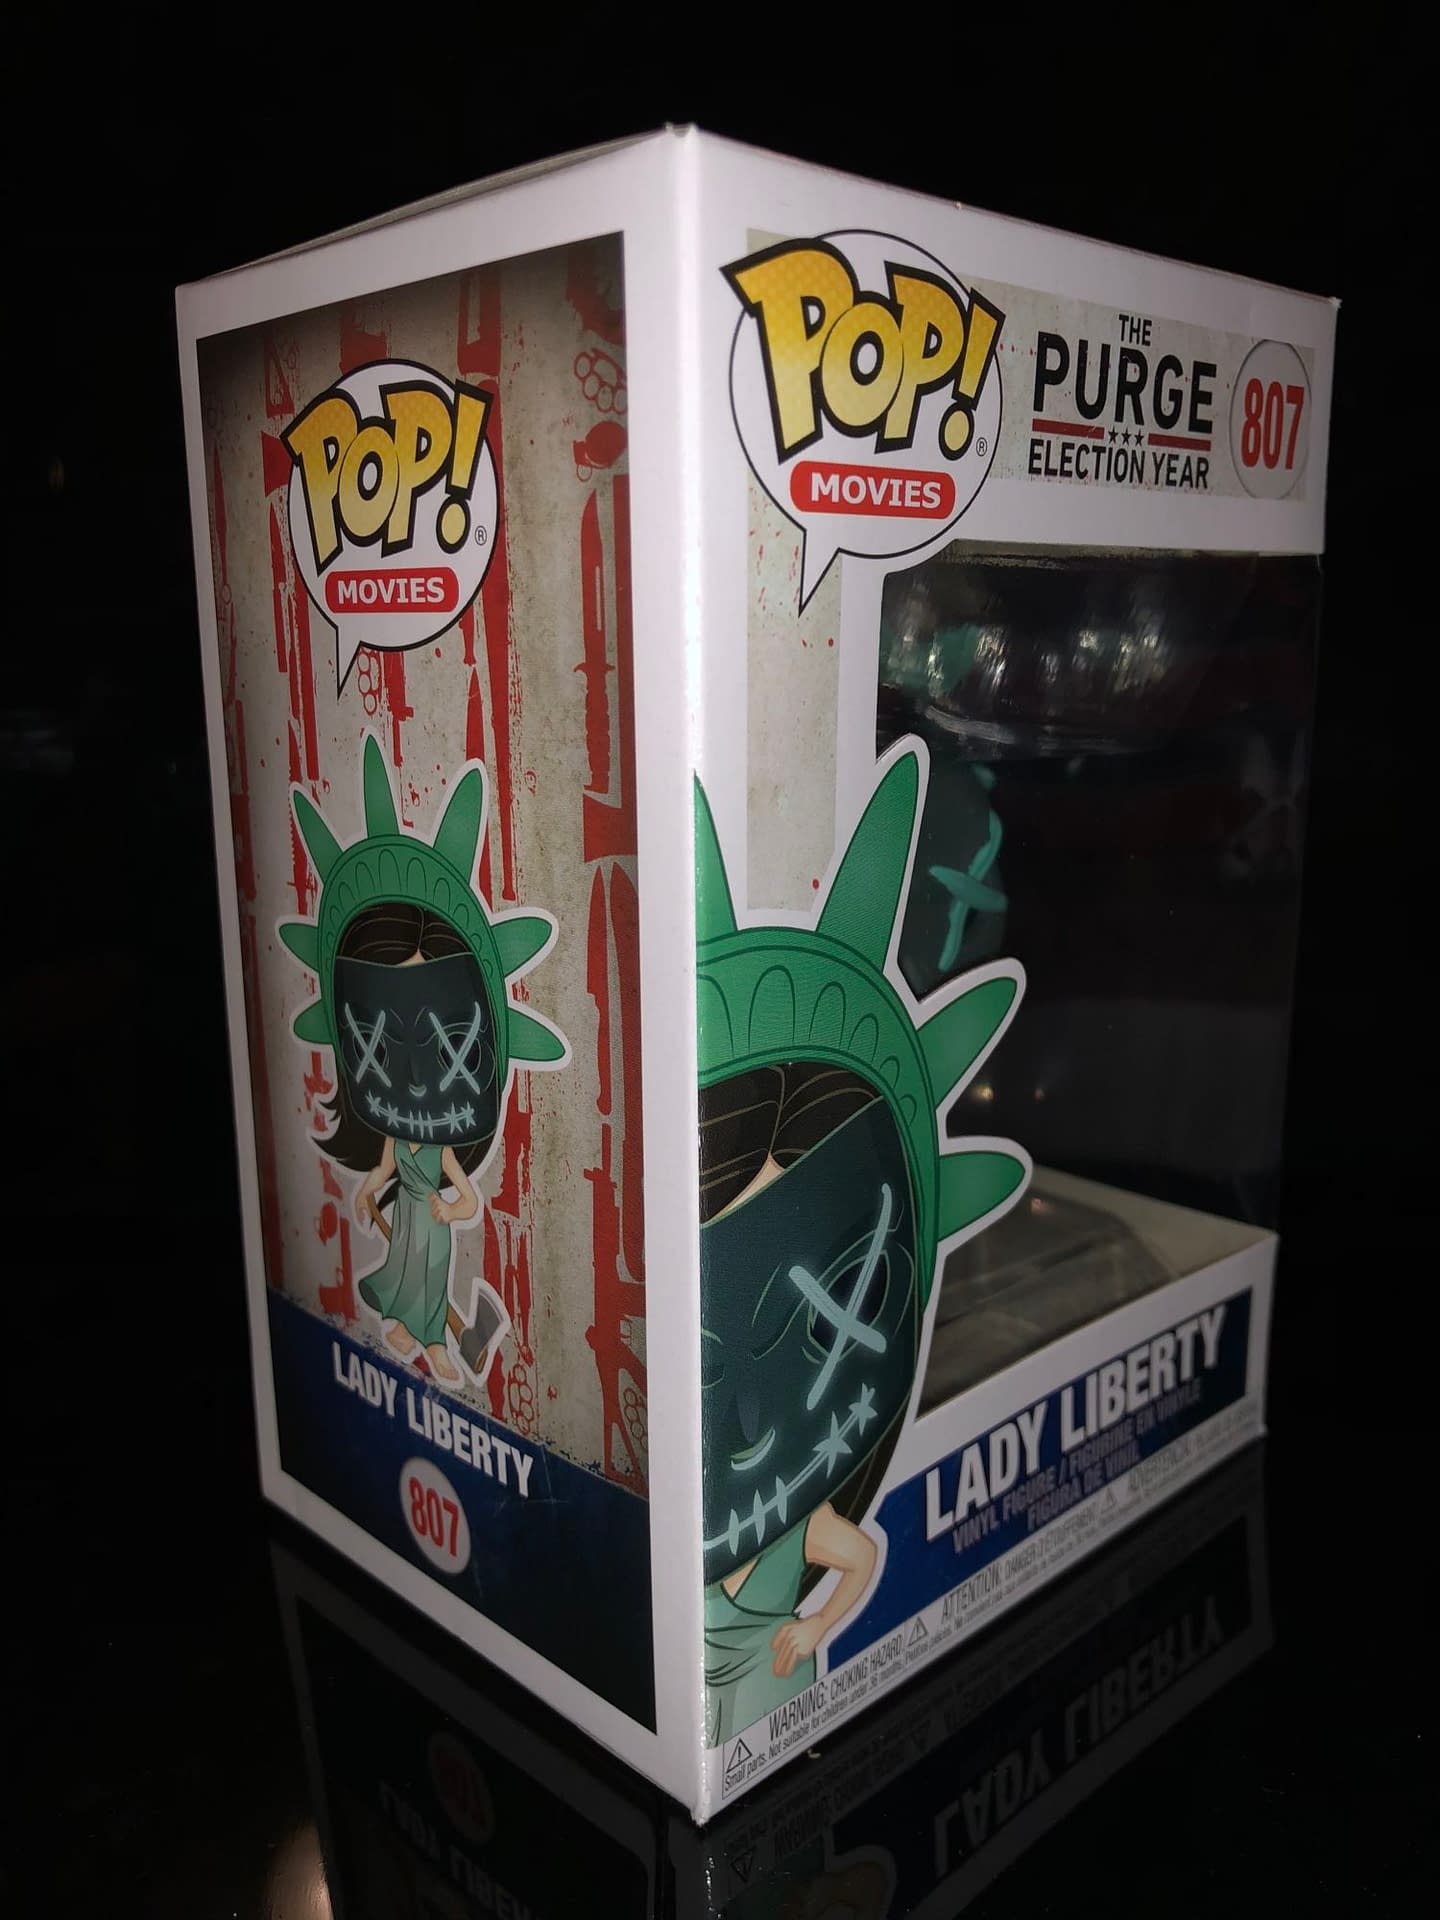 The Purge Gives Us the Deadly Lady Liberty with Funko [Review]